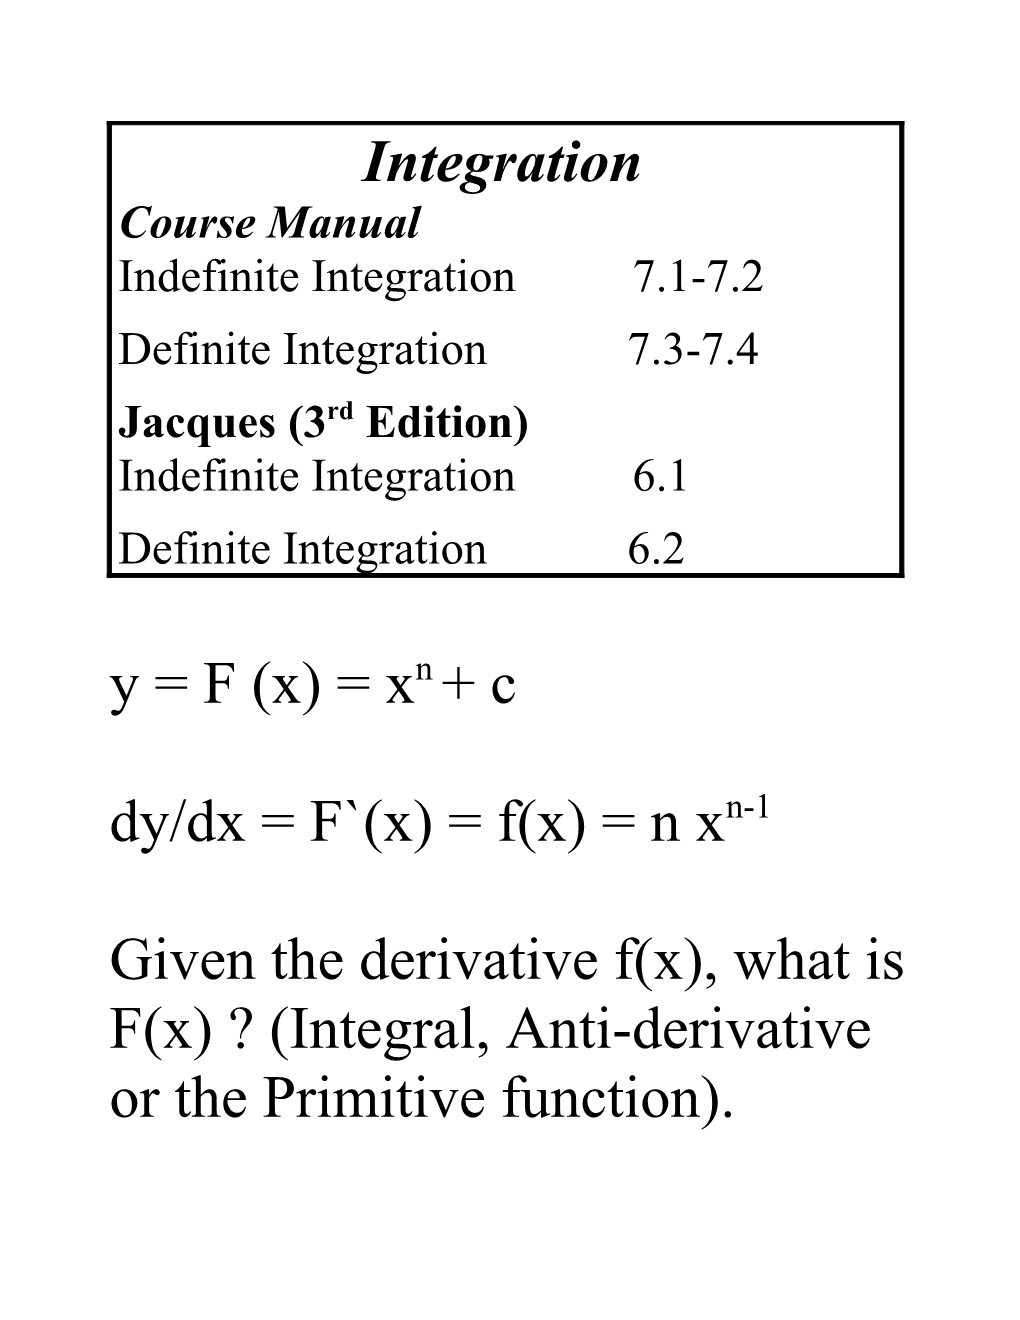 Given the Derivative F(X), What Is F(X) ? (Integral, Anti-Derivative Or the Primitive Function)